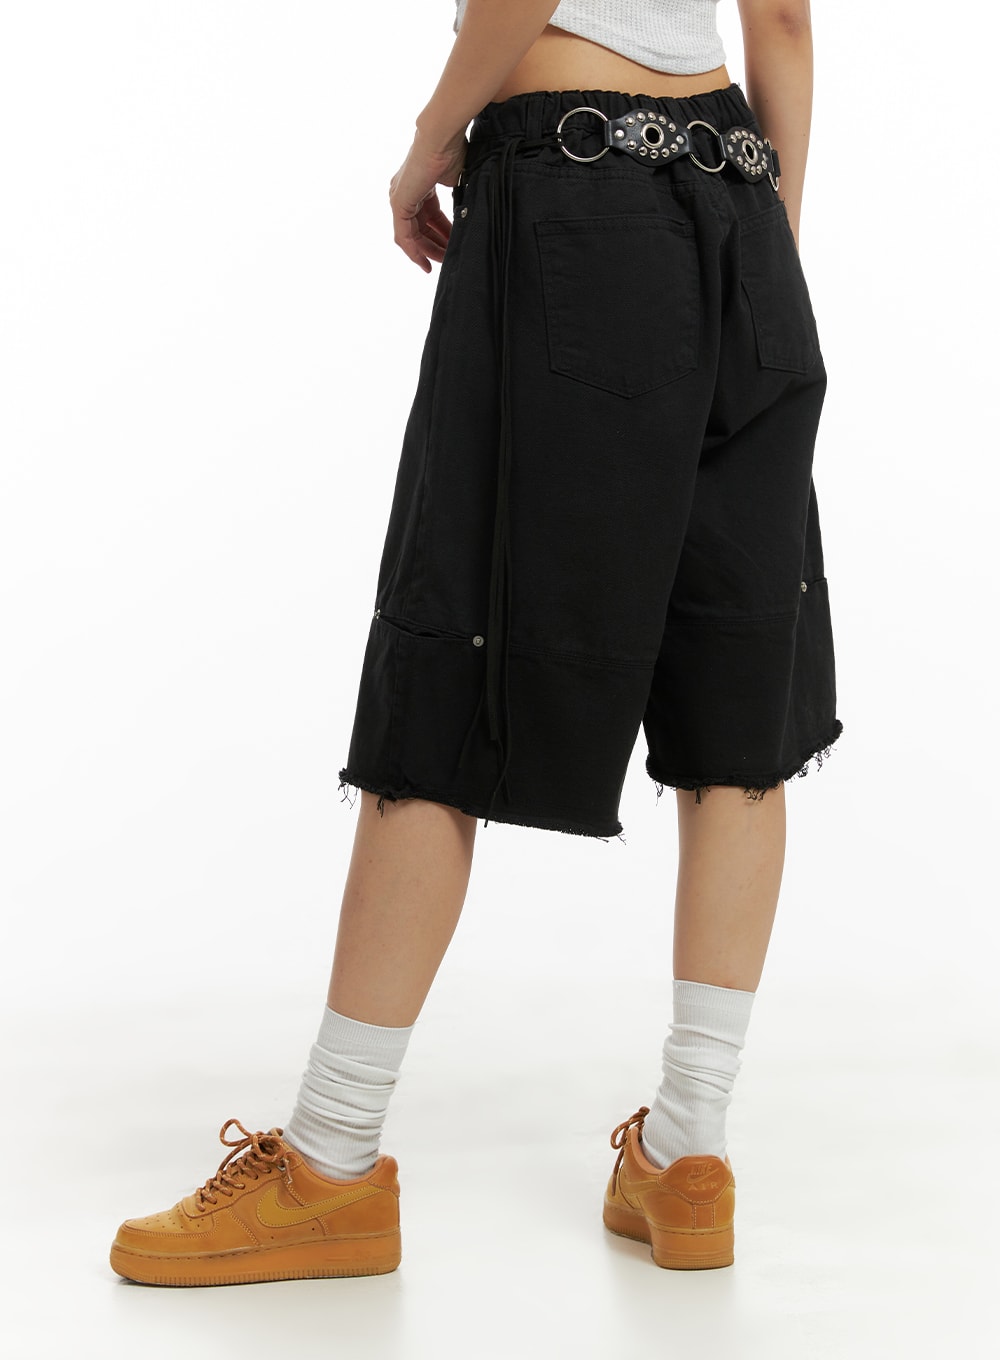 relaxed-fit-jorts-ca423